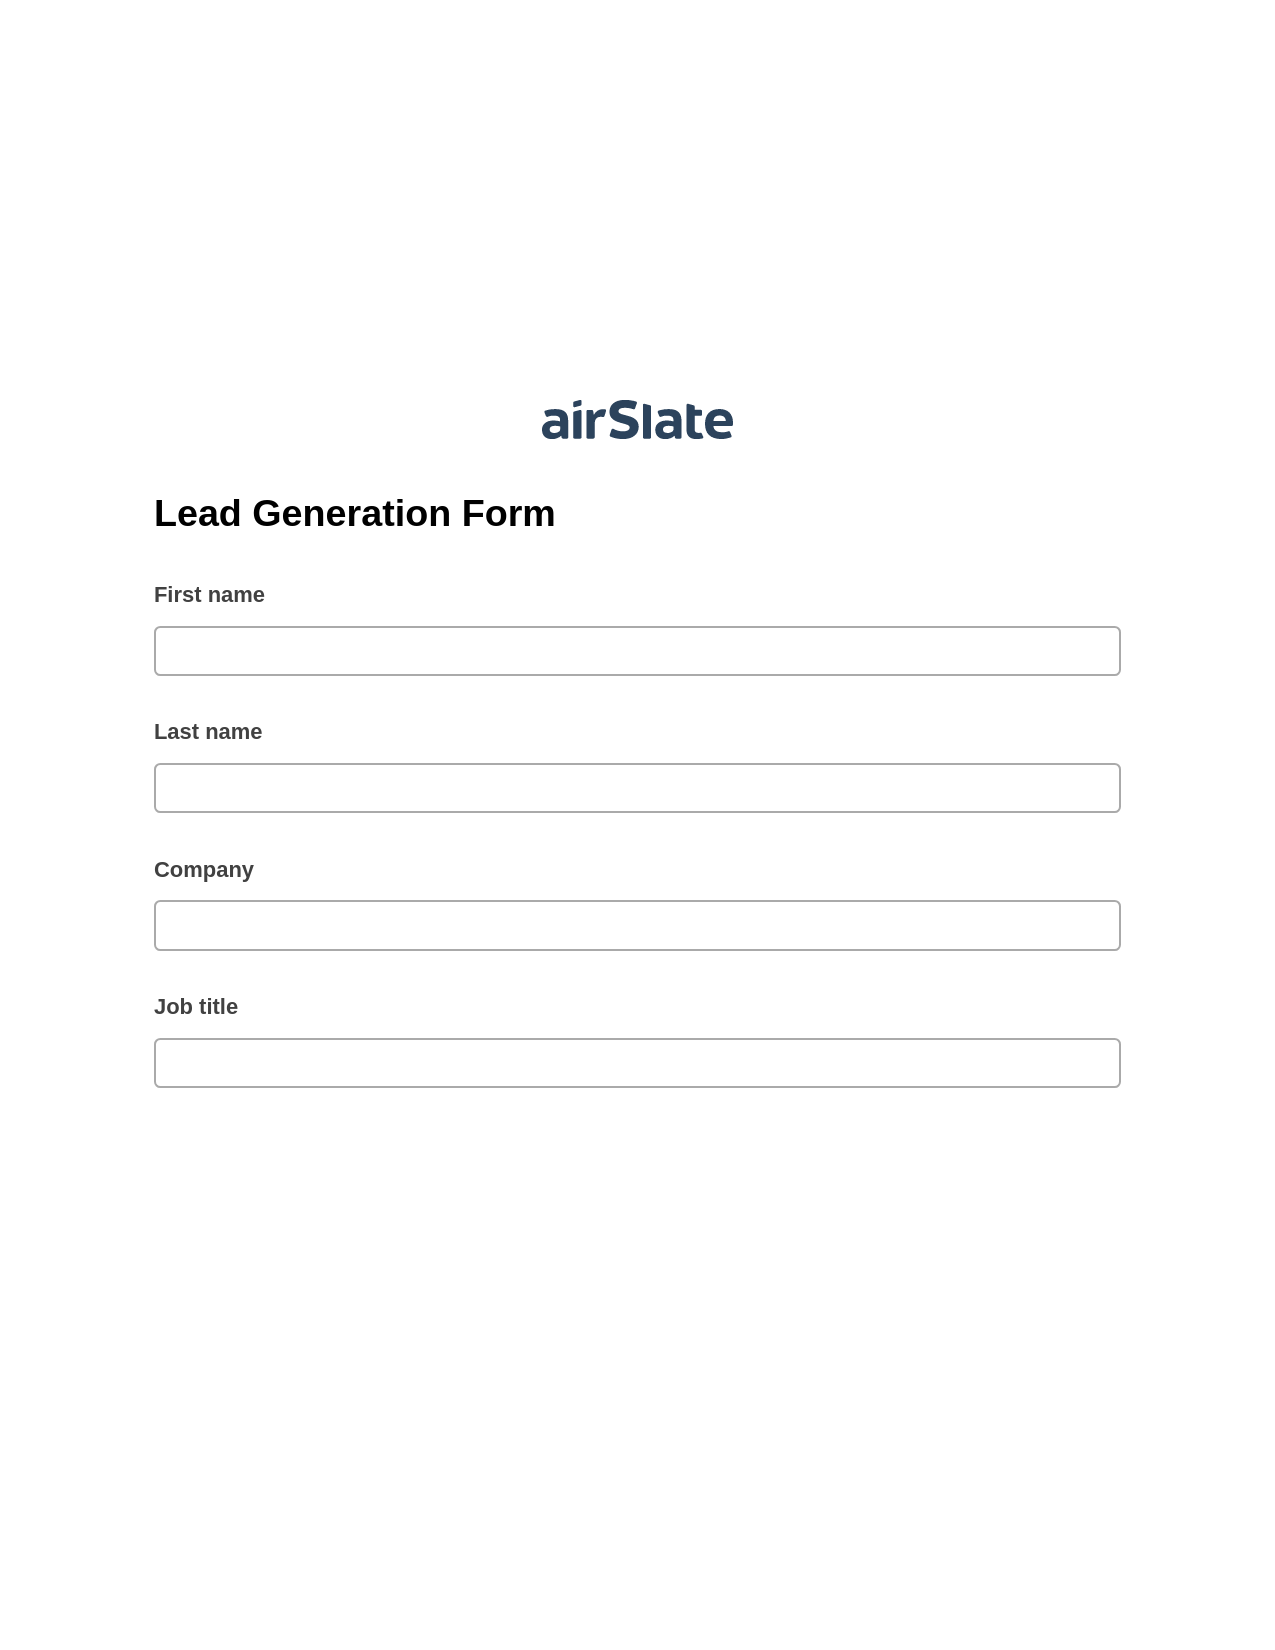 Lead Generation Form Pre-fill from CSV File Bot, Set signature type addon, Archive to Dropbox Bot